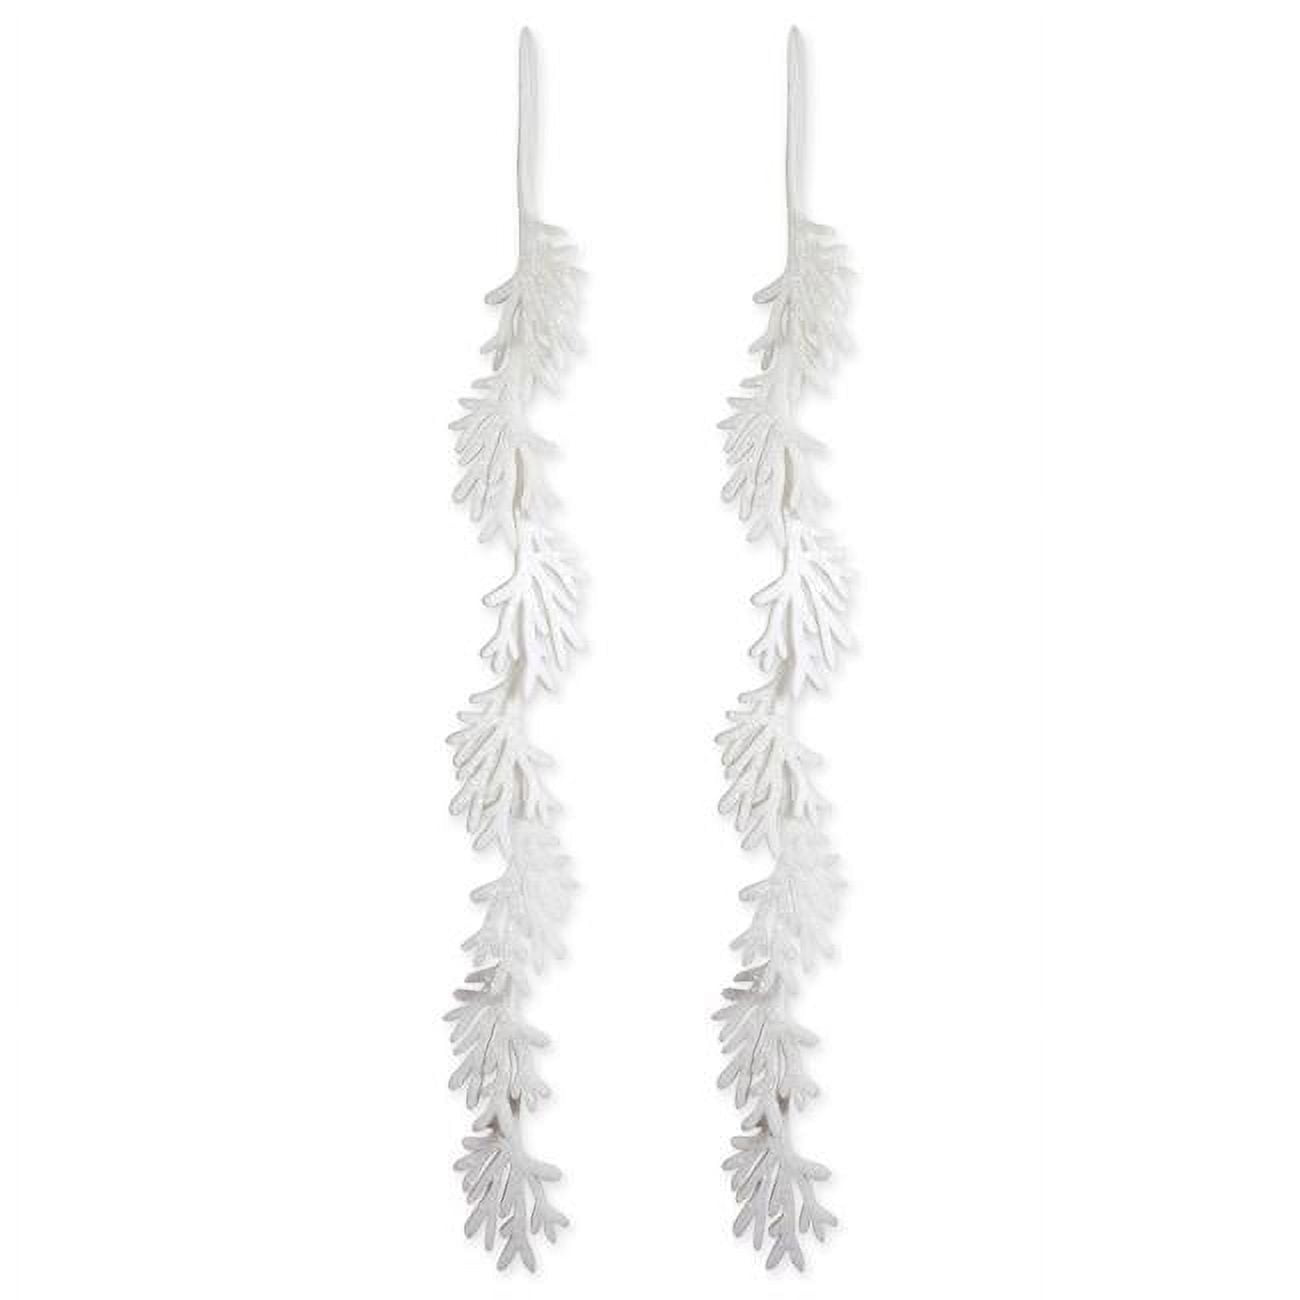 Picture of Design Imports CAMZ38022 Hanging Foam Garland Leaves - Set of 2